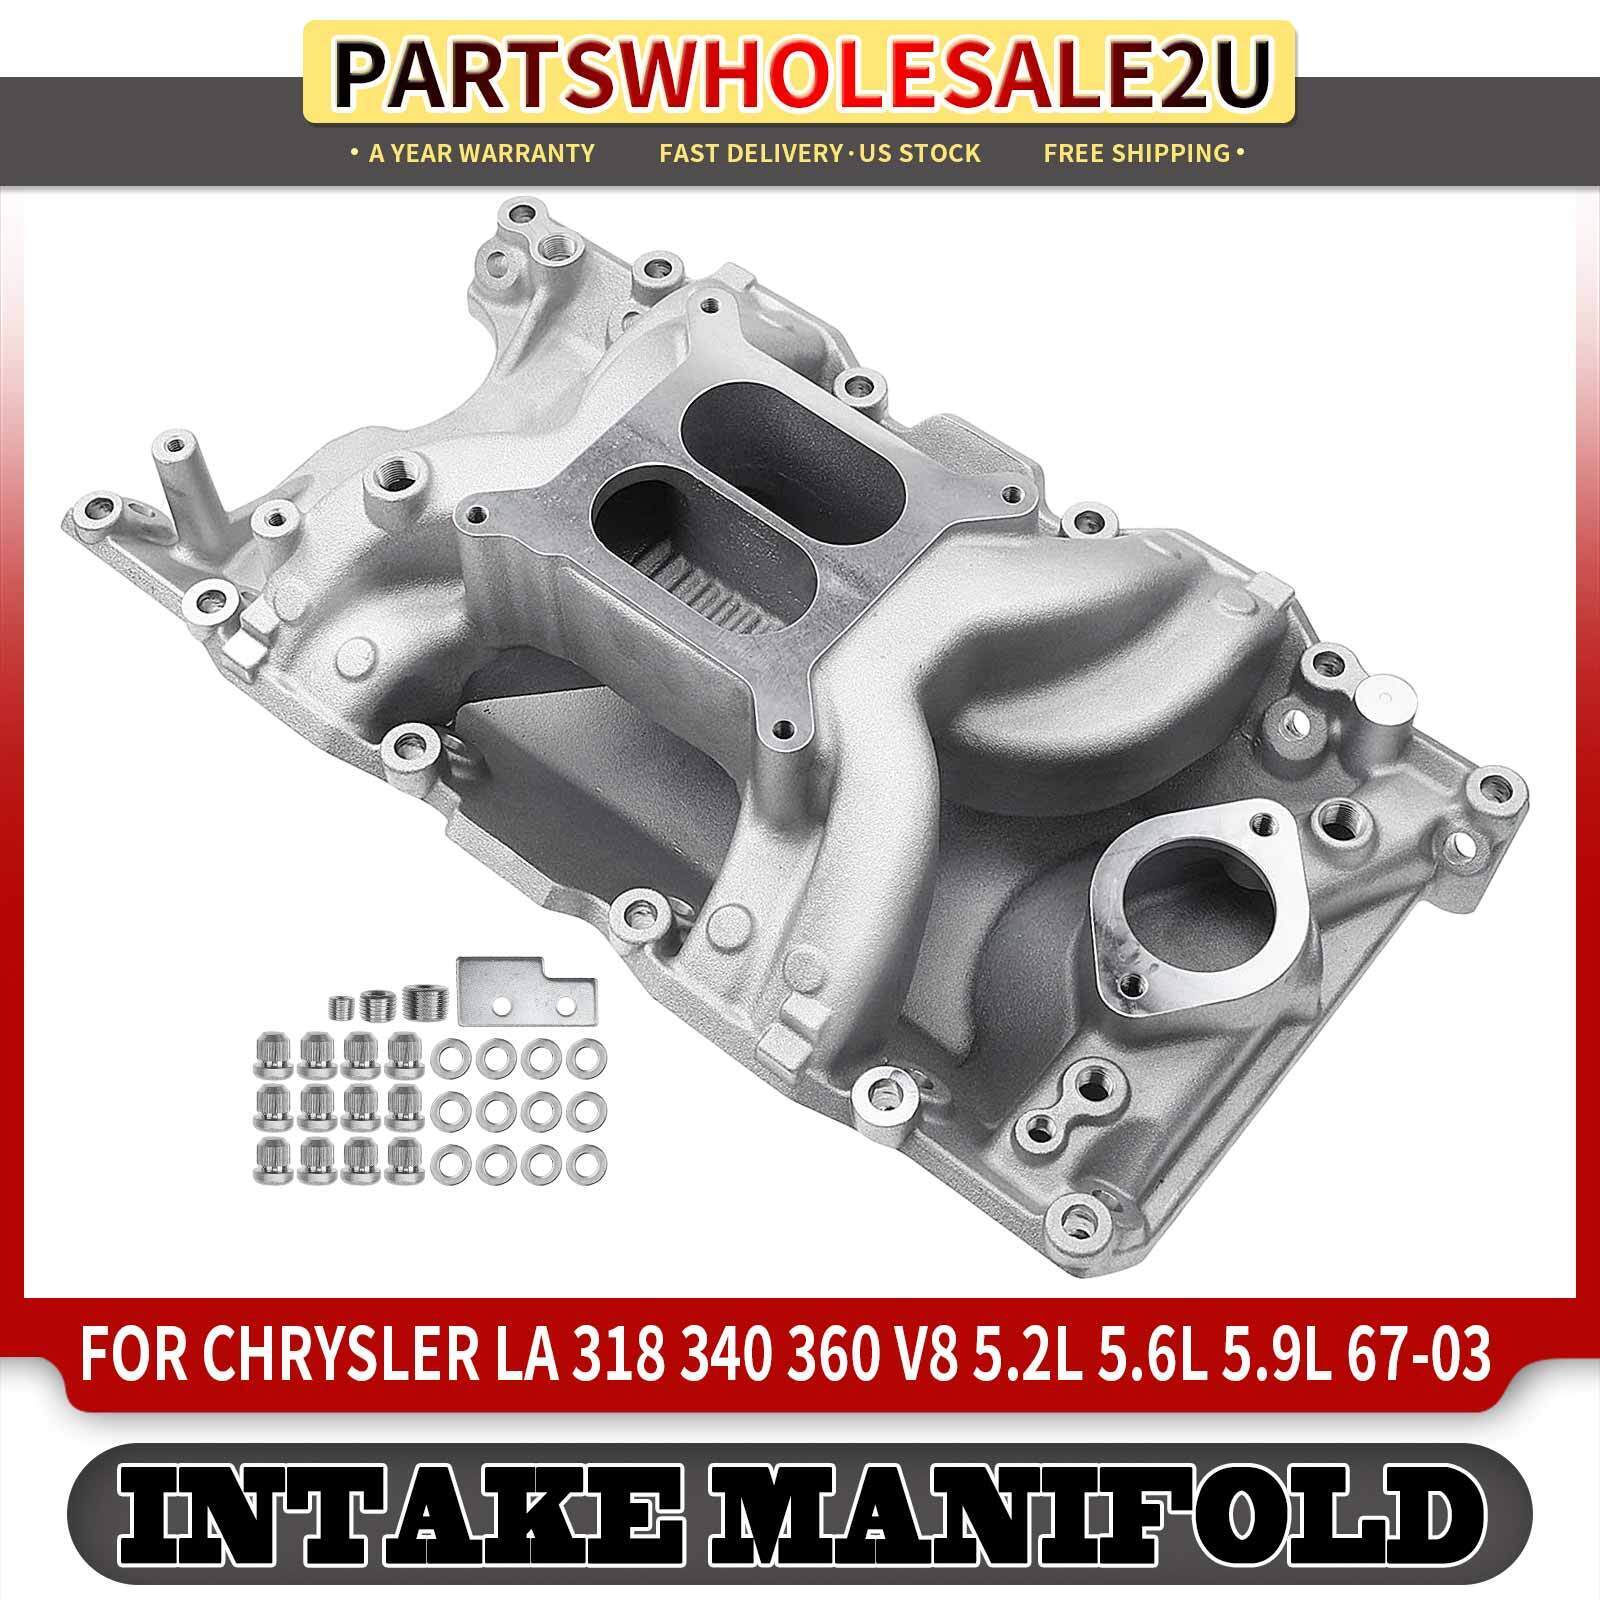 Dual Plane Intake Manifold for Dodge Challenger Ram Chrysler New Yorker Plymouth